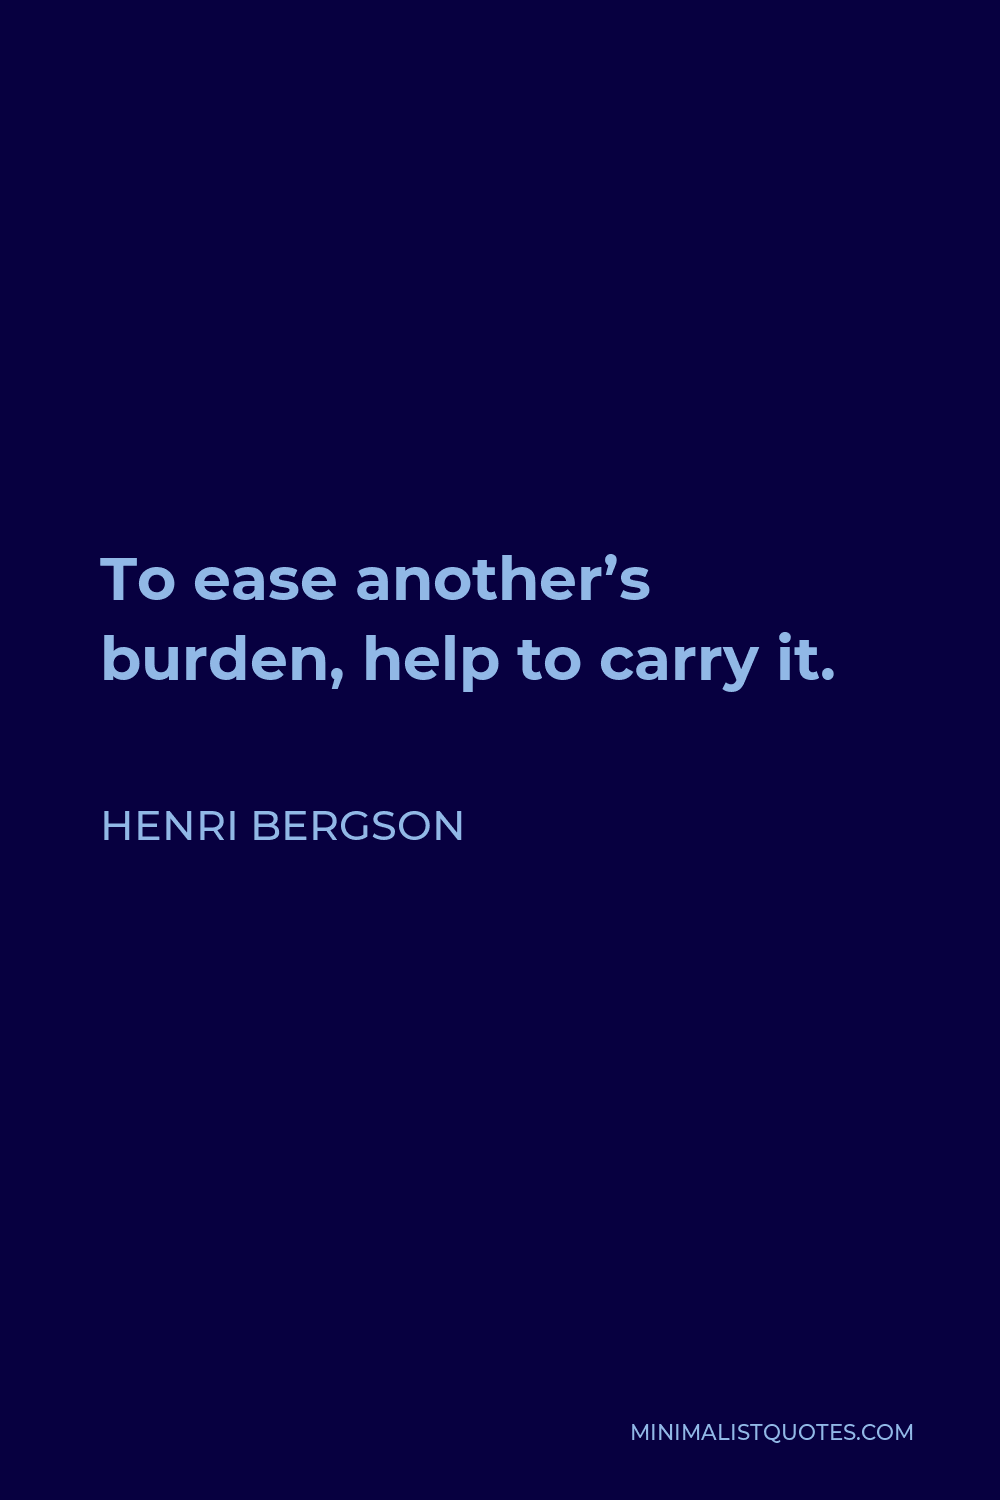 Henri Bergson Quote - To ease another’s burden, help to carry it.